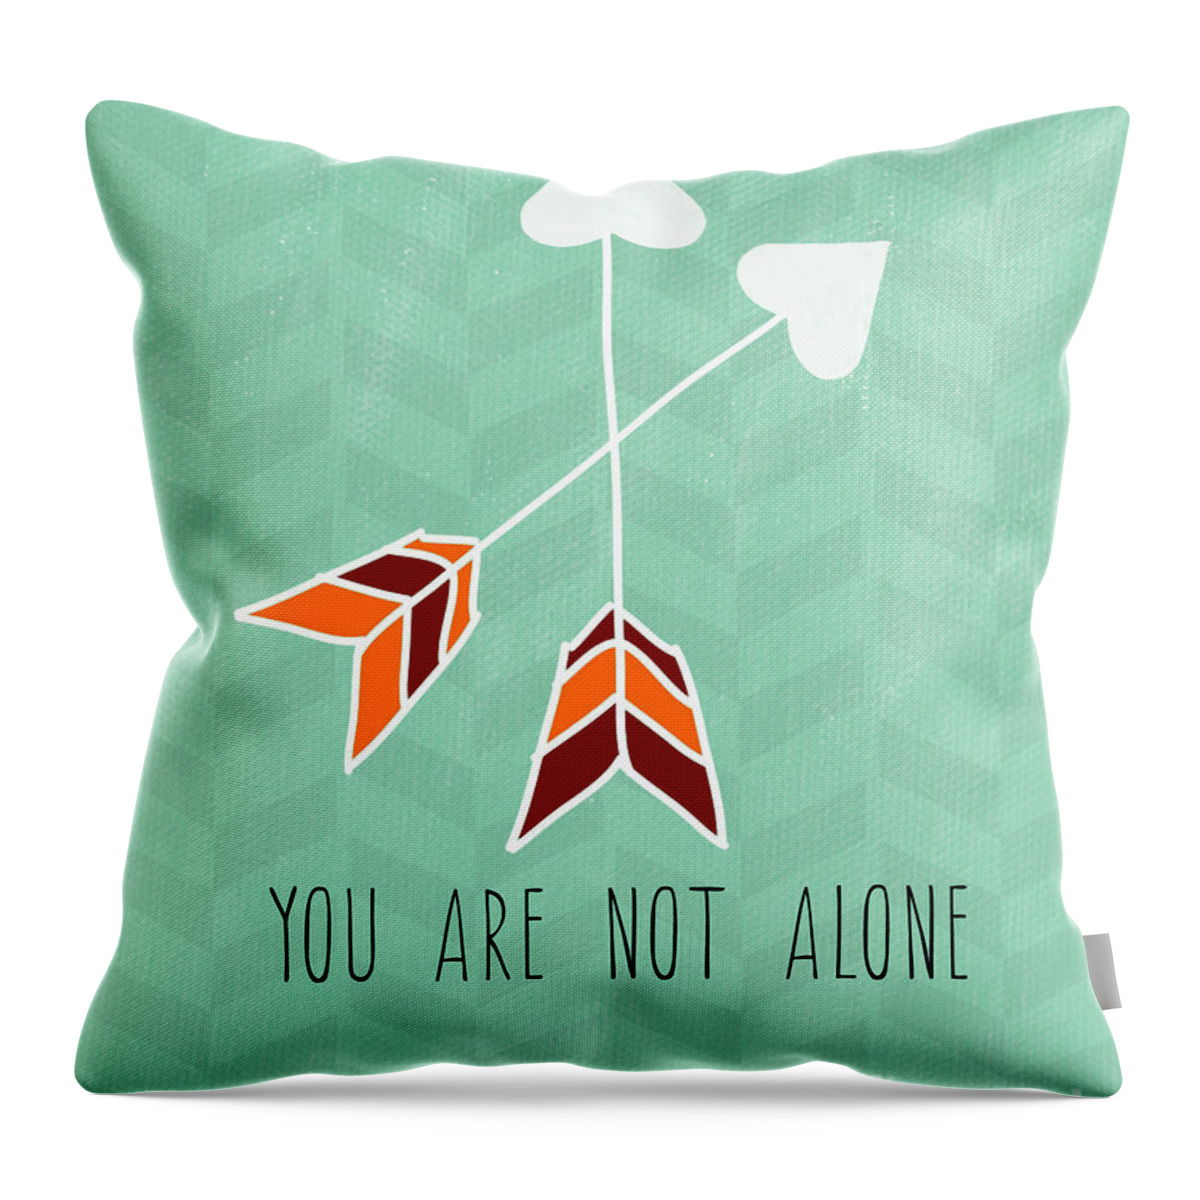 Heart Throw Pillow featuring the painting You Are Not Alone by Linda Woods